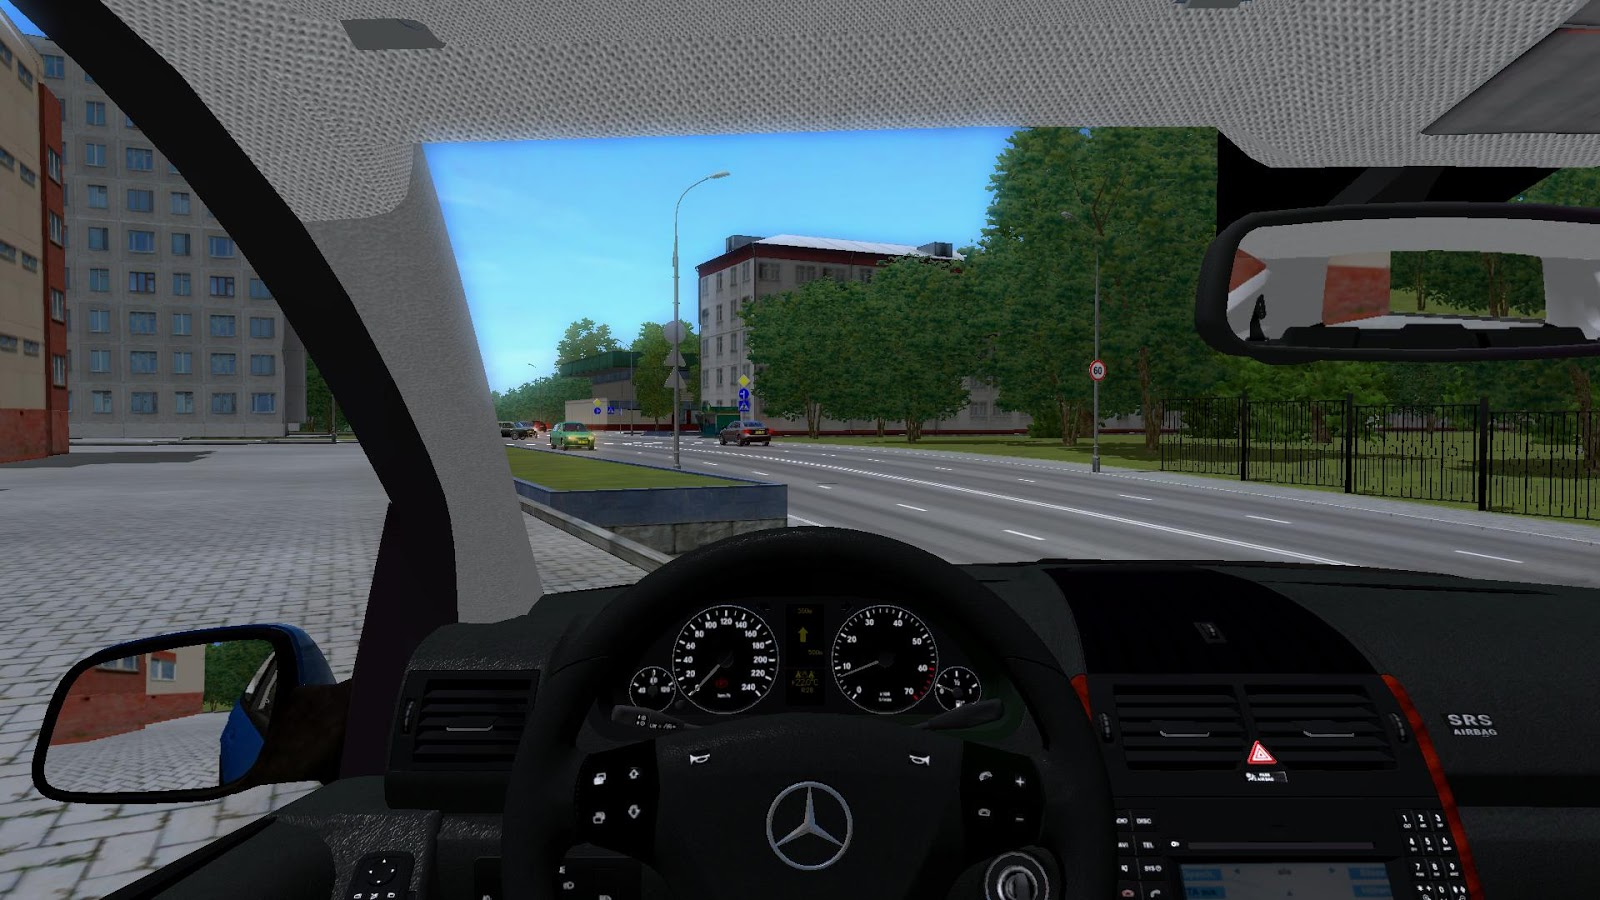 Трафик сити кар драйвинг. City car Driving Mercedes-Benz a200 Coupe. Mercedes a 200 City car Driving. Mercedes e200 Coupe City car Driving Simulator. City car Driving Simulator 2.